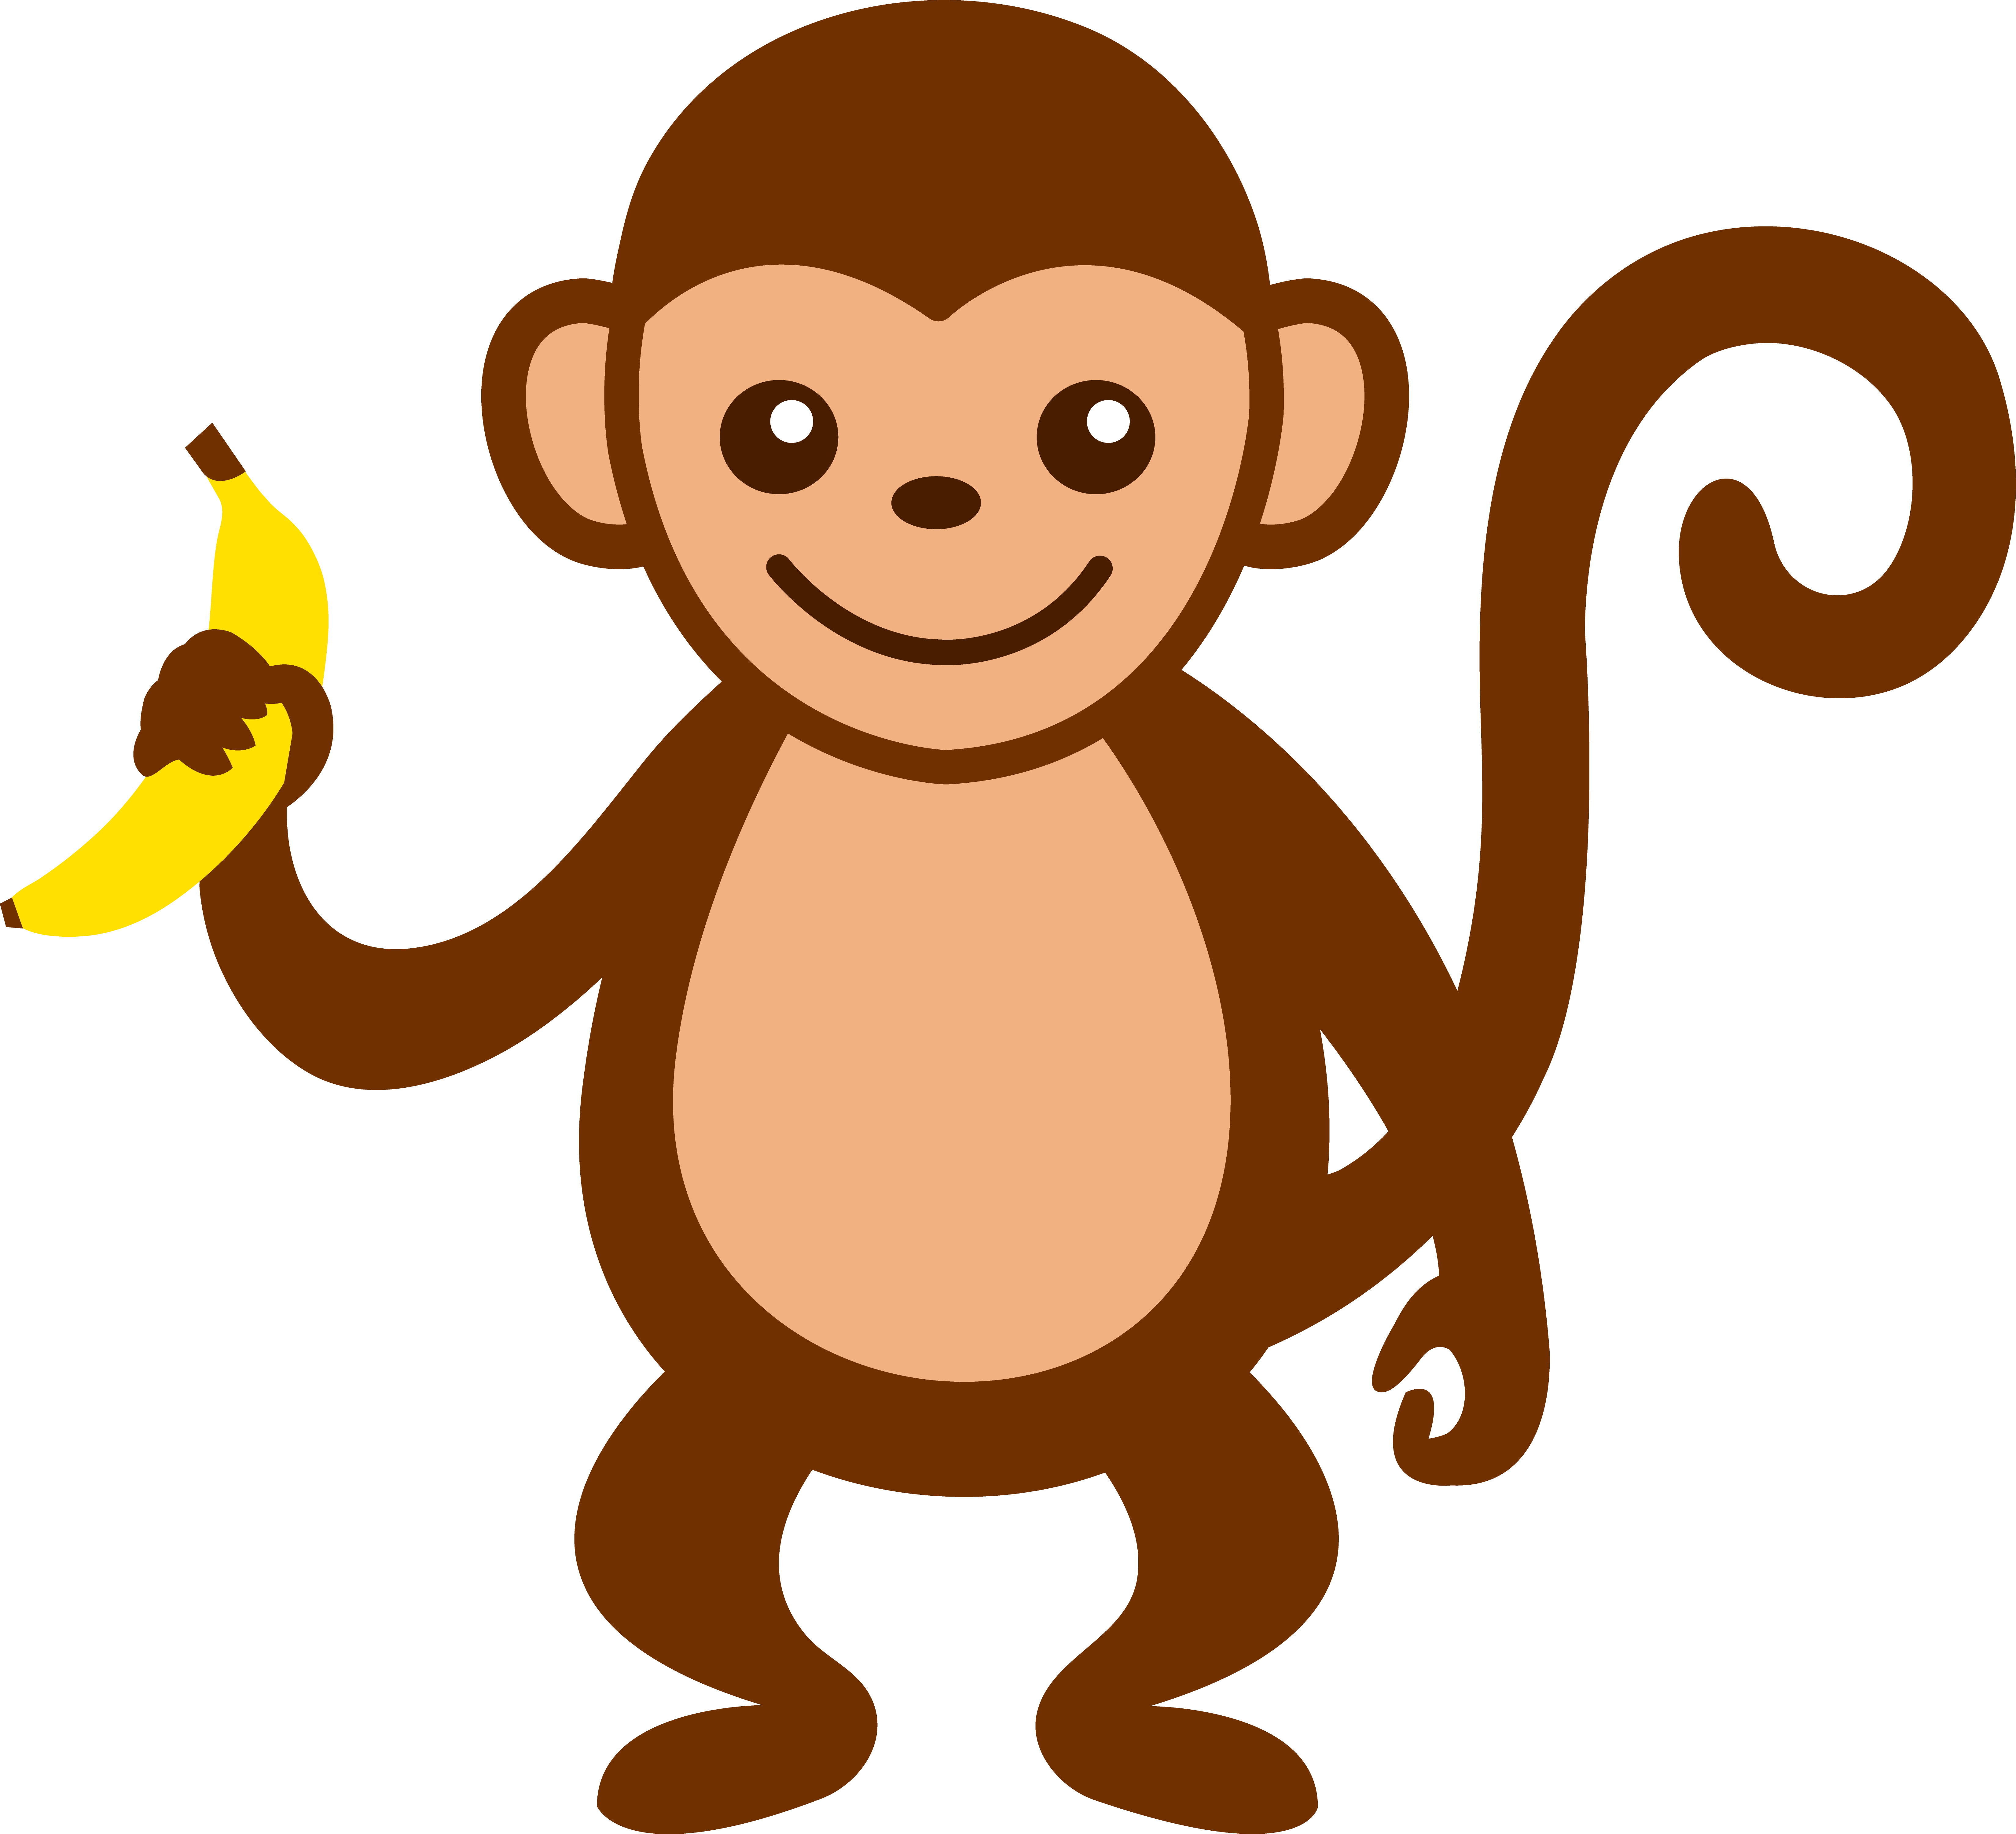 How To Draw A Monkey Eating A Banana